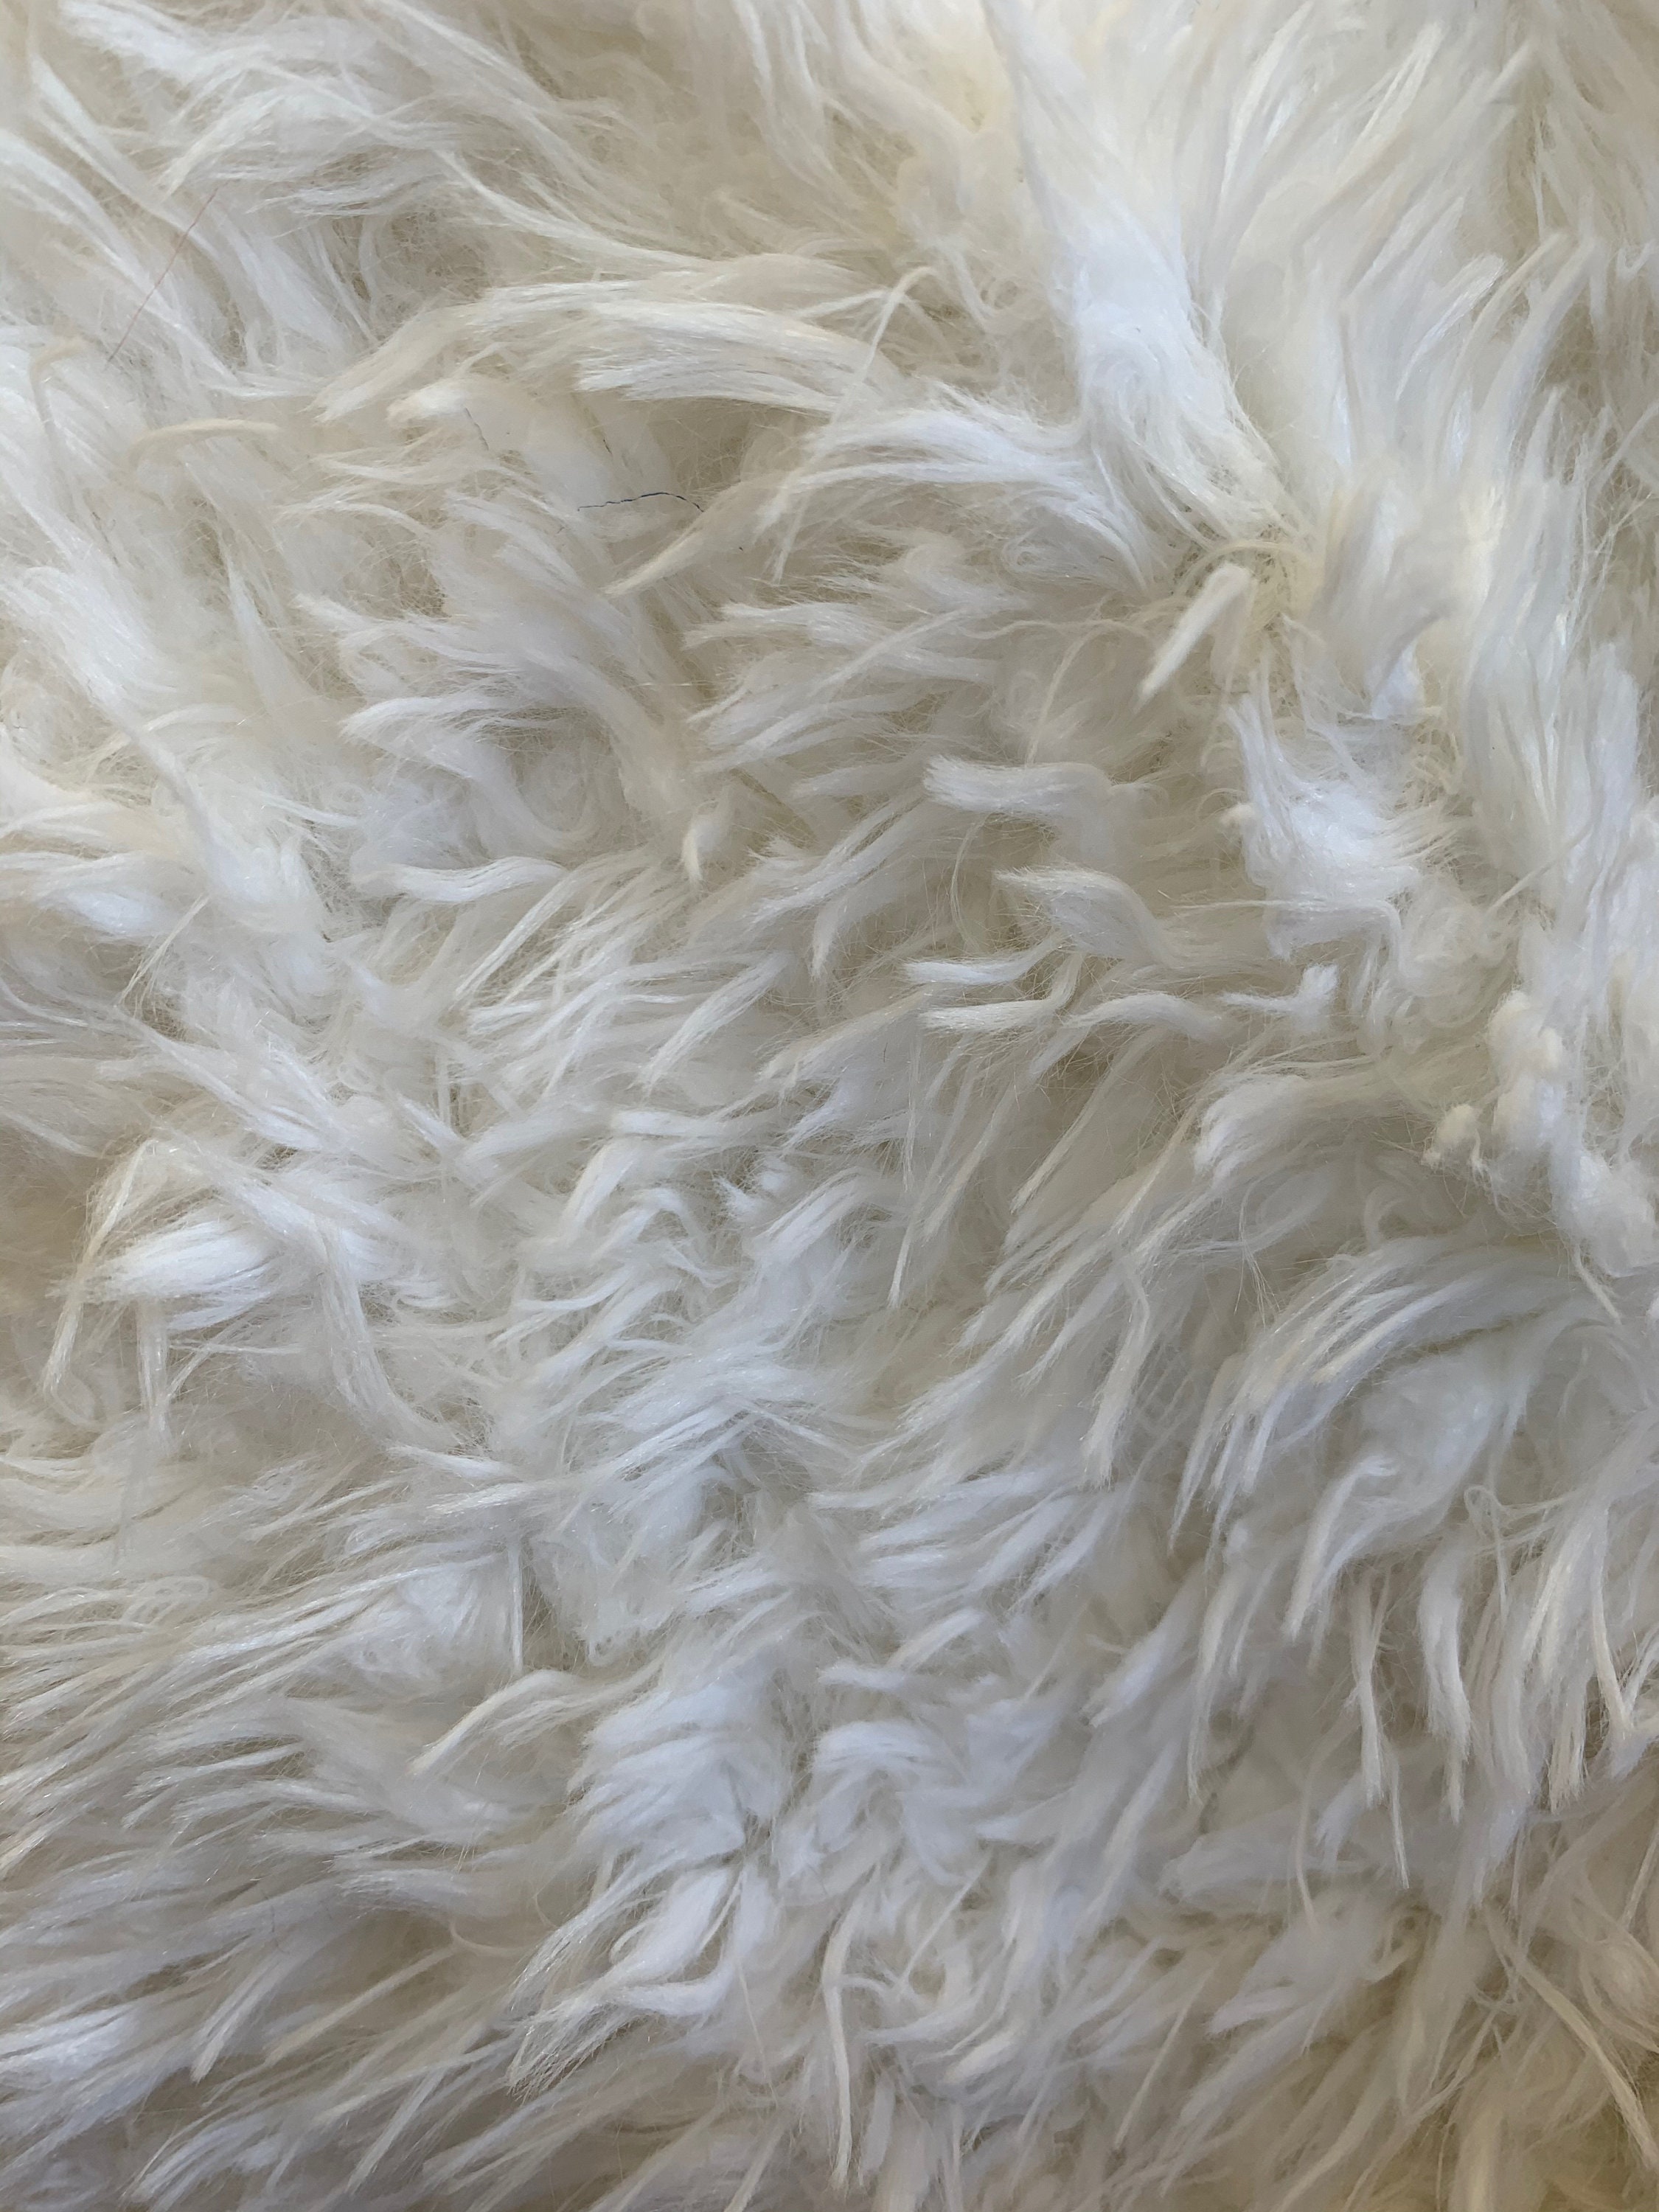 Anika WHITE Soft 4 Long Pile Faux Fur Fabric for Fursuit, Cosplay Costume,  Photo Prop, Trim, Throw Pillow, Crafts 50050 